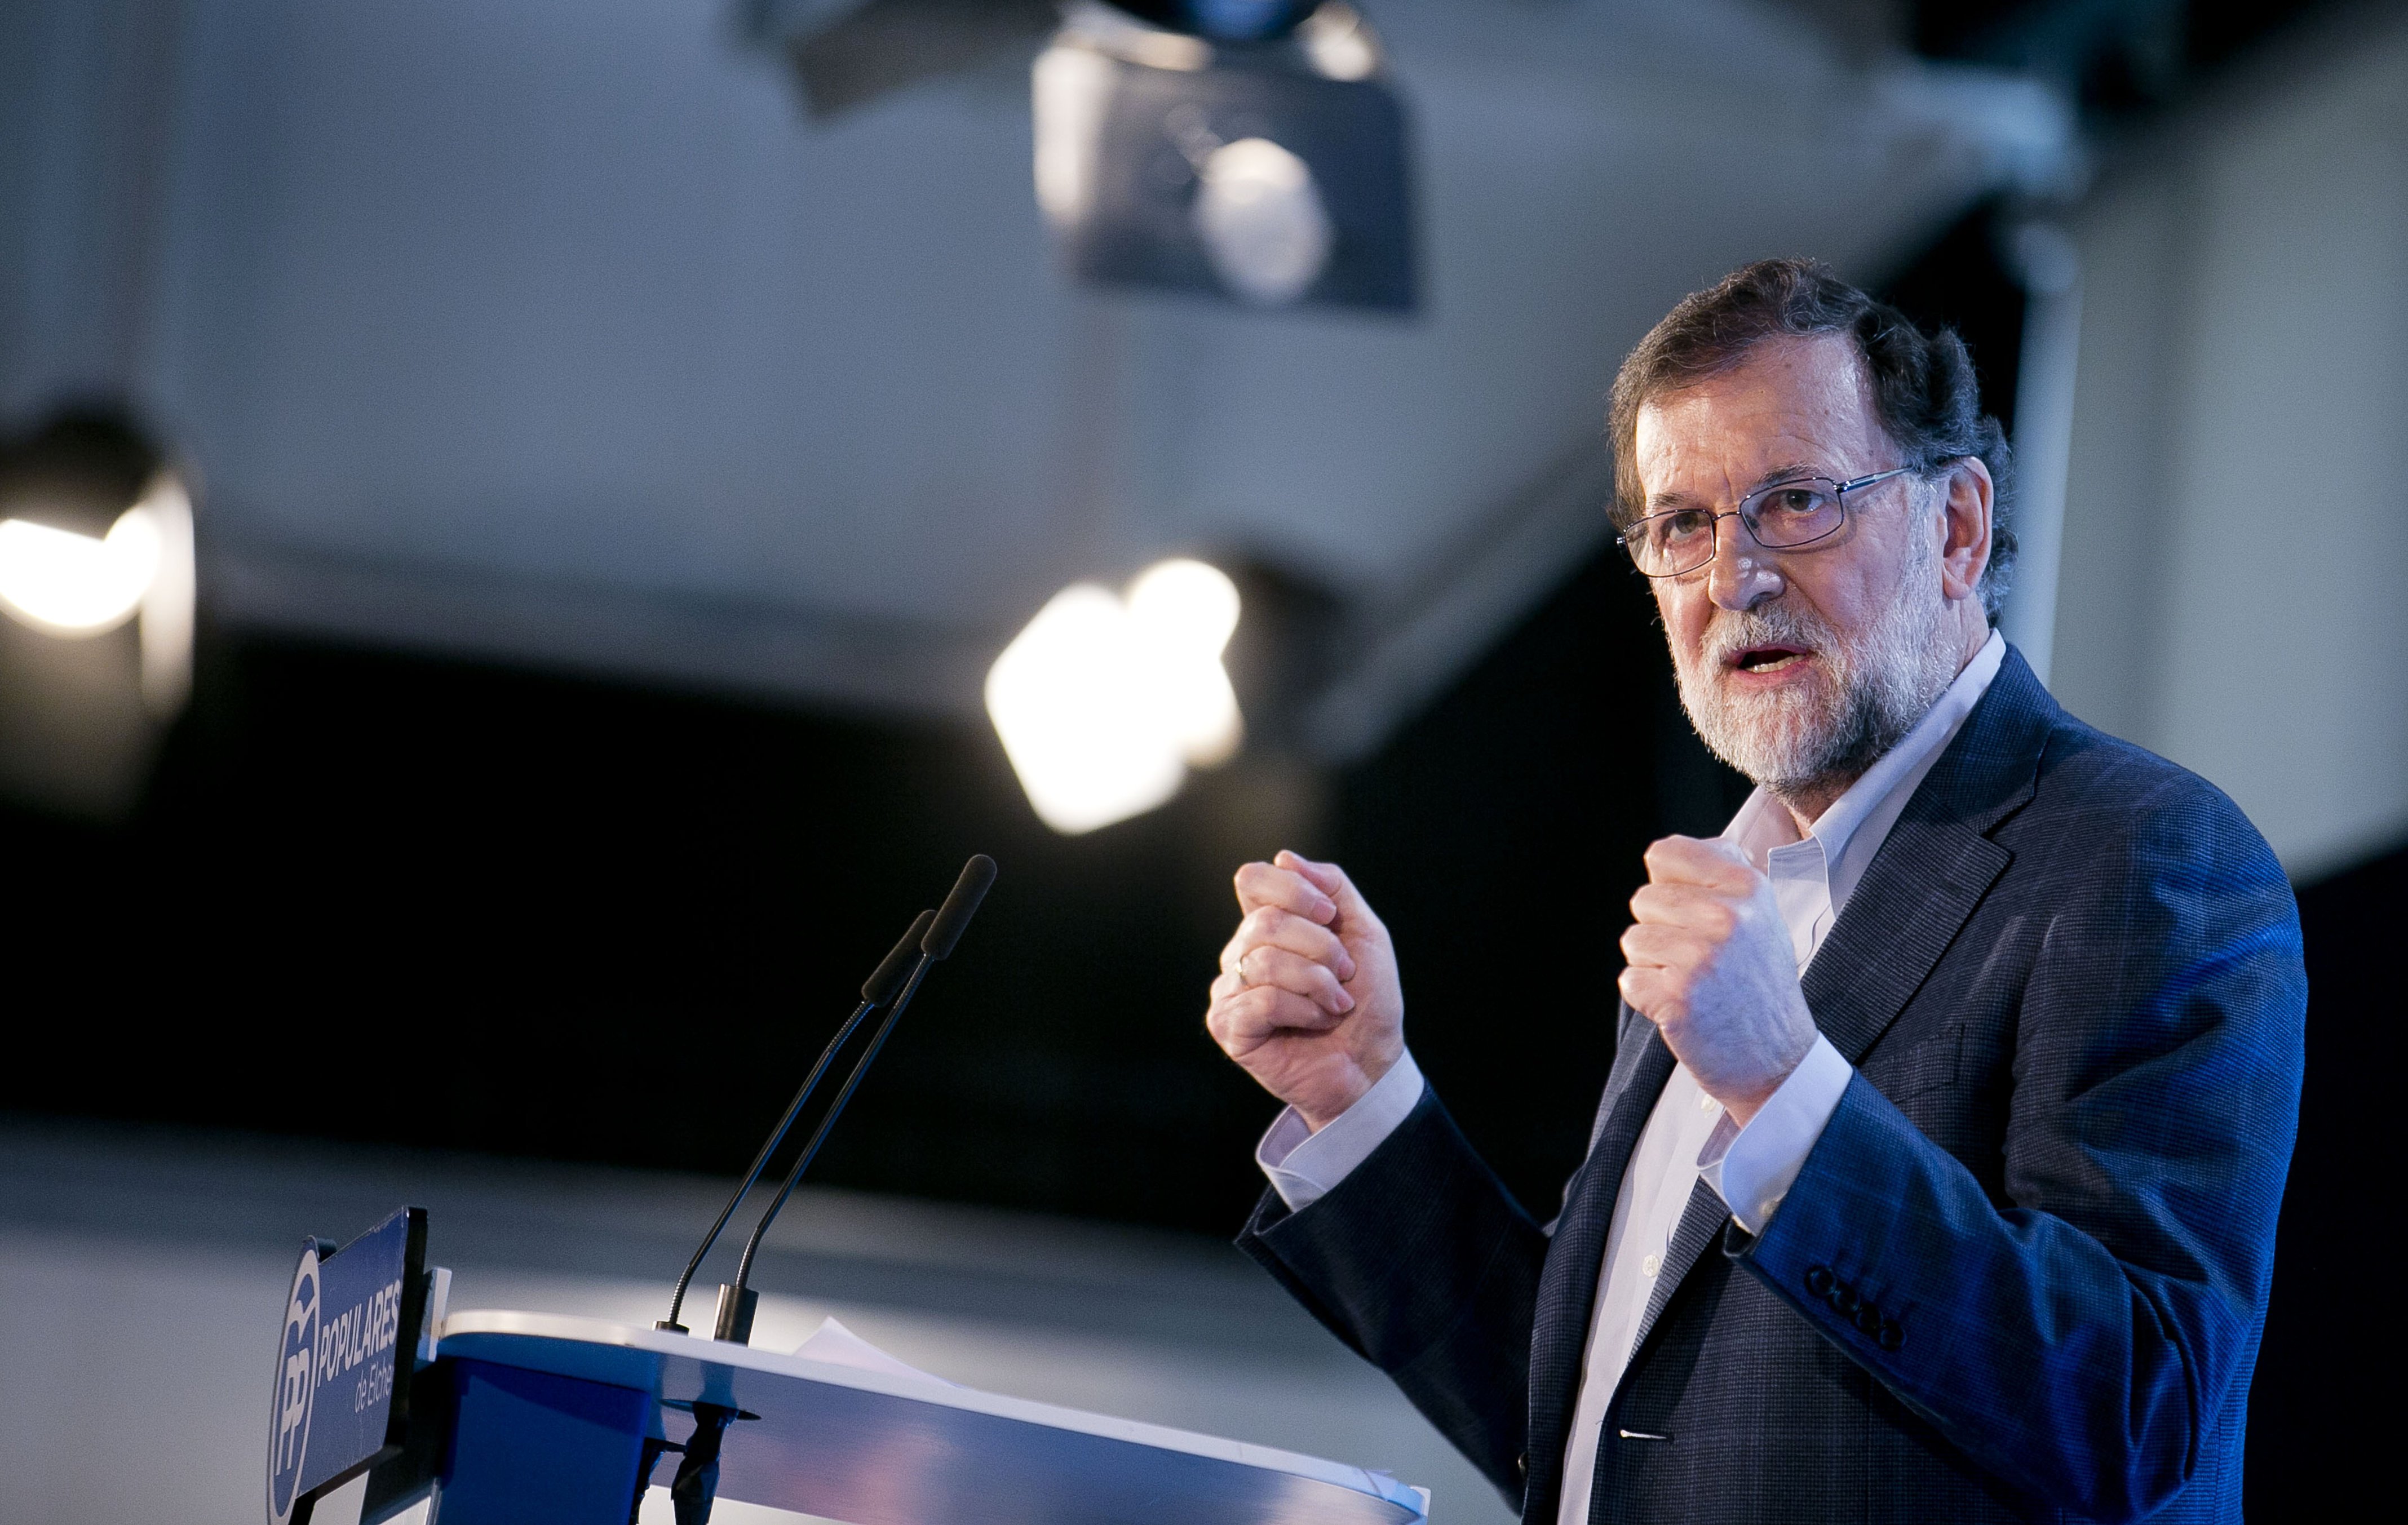 Rajoy criticises "debates about languages" after attacking Catalonia's system